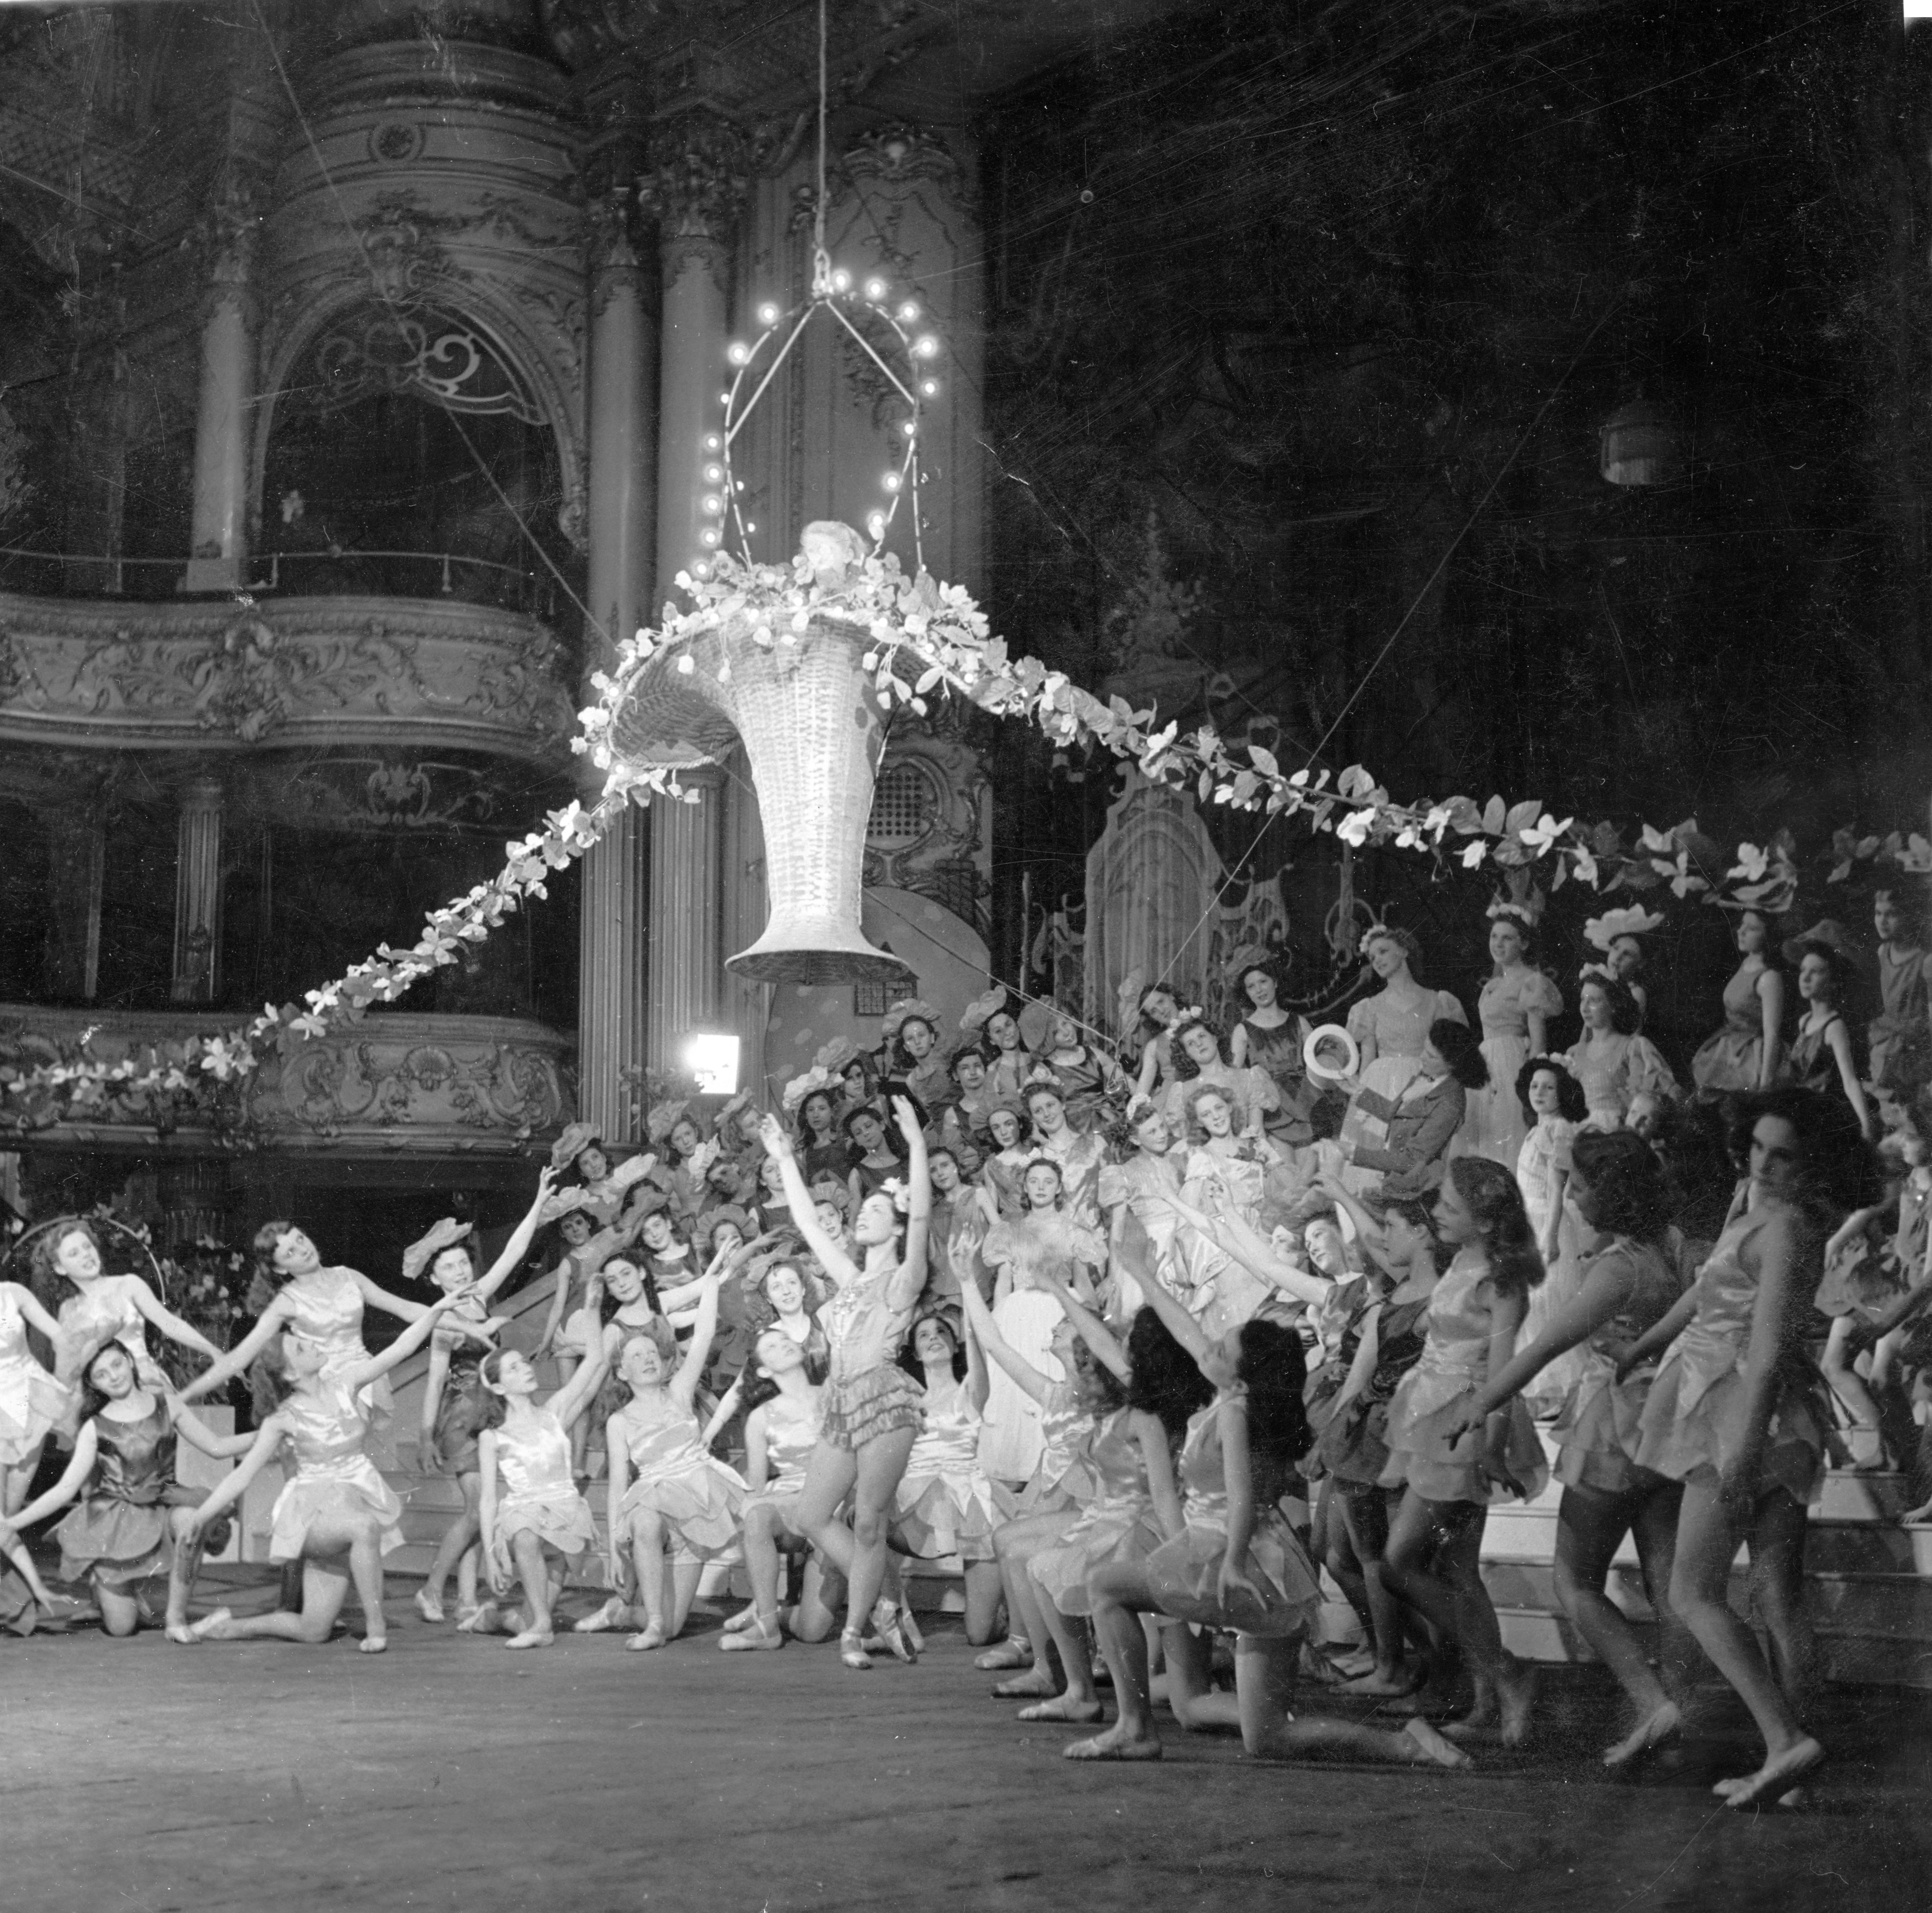 Childrens Ballet in 1947 at The Blackpool Tower